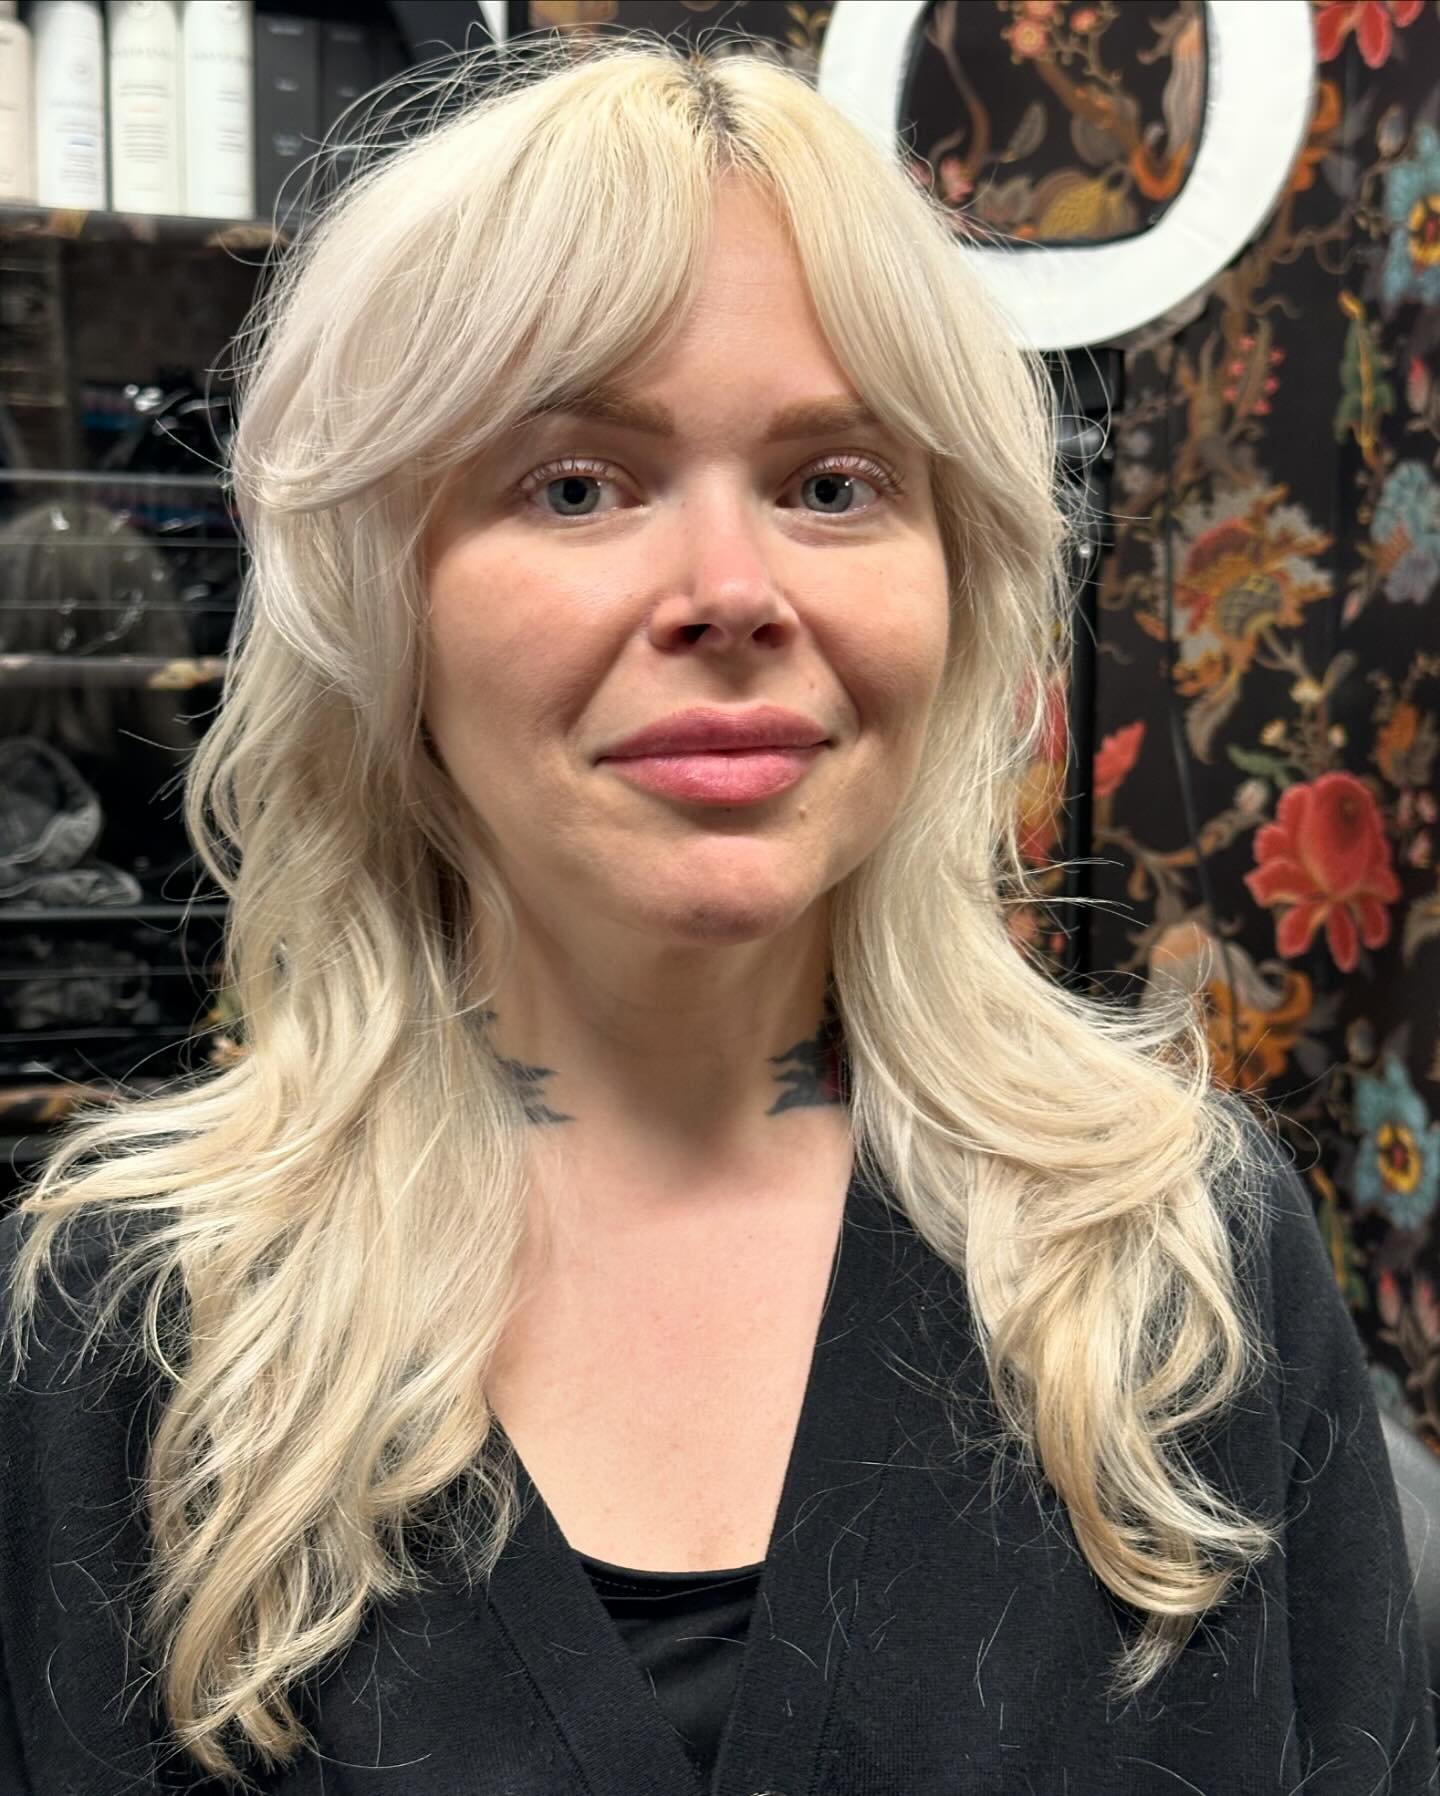 Dreamy blonde &amp; whispy layers🥹💓 k18 @wella 

#whispyhair#shaghaircut#whispylayers#trendyhair#hairtrends#platinumblonde#blondehair#shaggybangs#bighair

#nychairstylist#nychaircolorist#manhattanhairstylist#manhattanhaircolorist#brooklynhairstylis